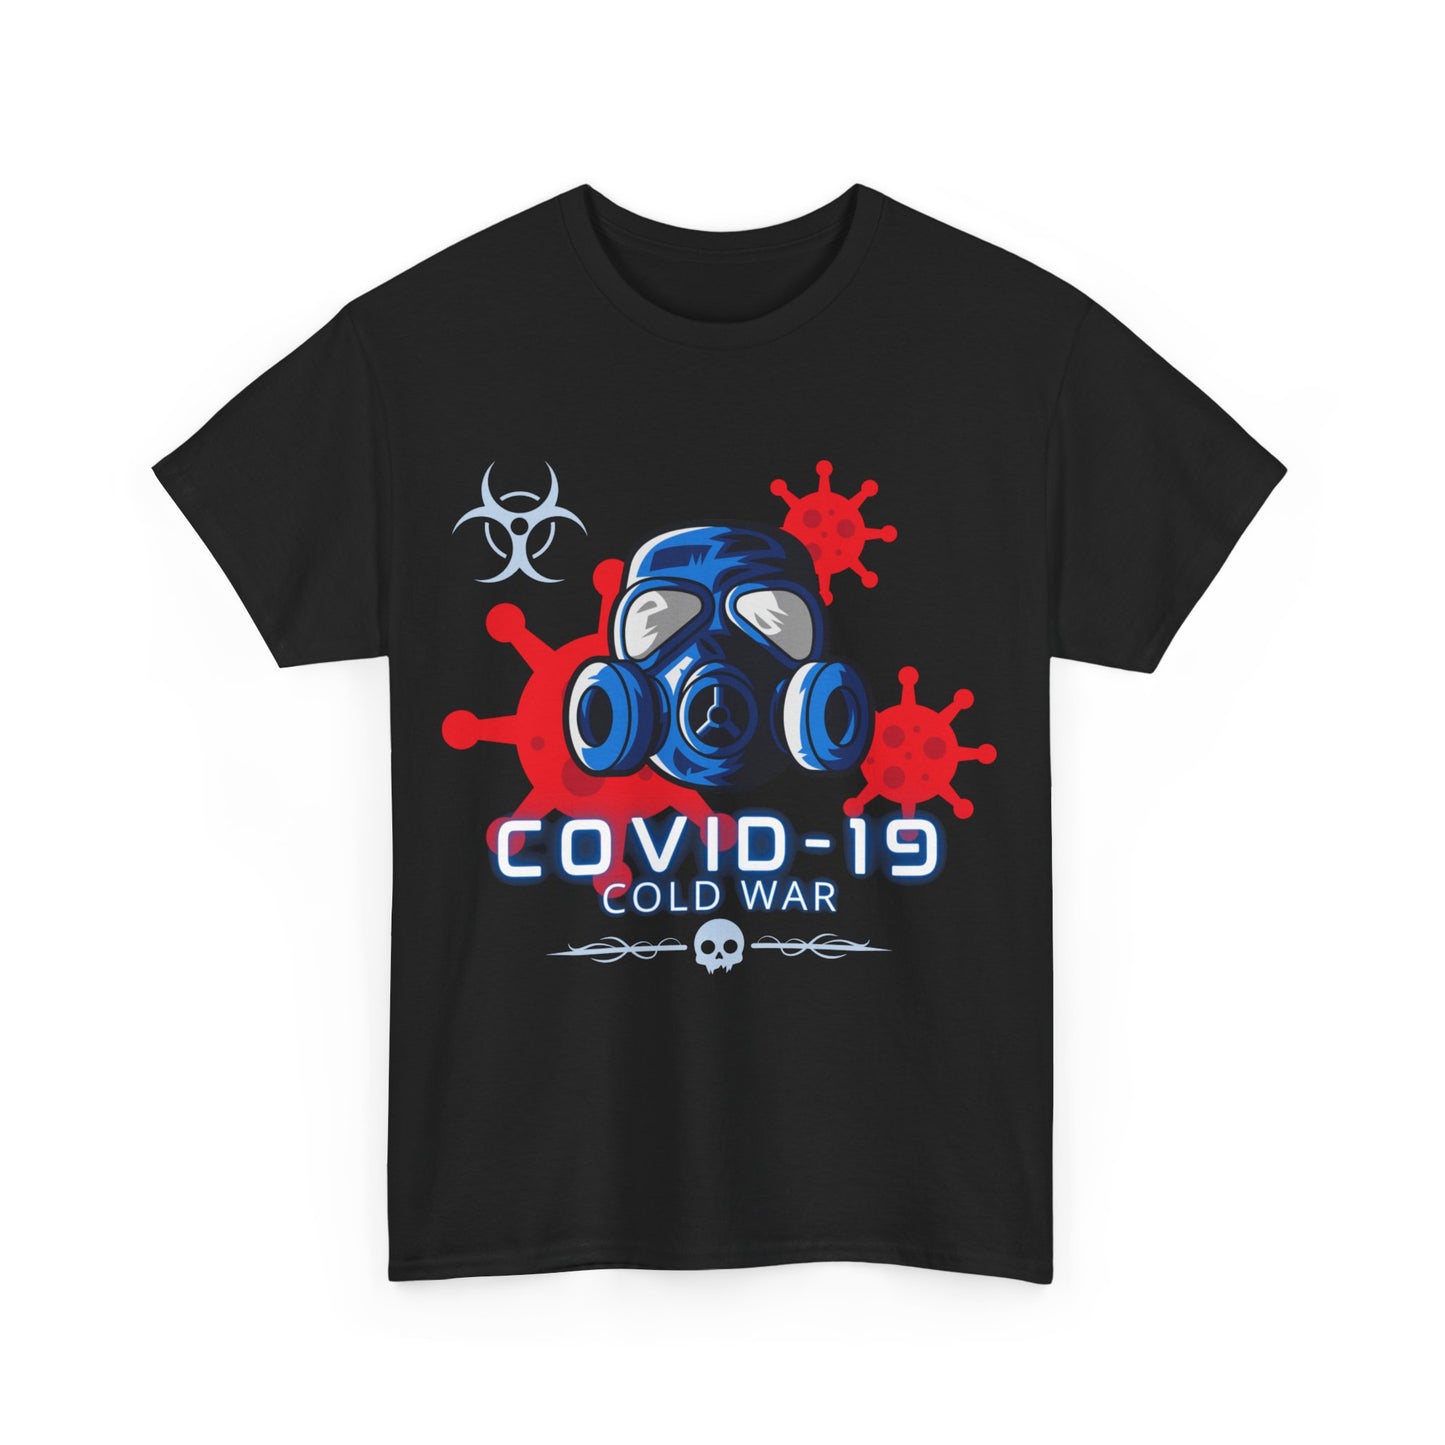 Covid-19 T-Shirt, Cold War Tee 100% Cotton, 5 Colours, AUS - USA - CAN warehouse, free post.